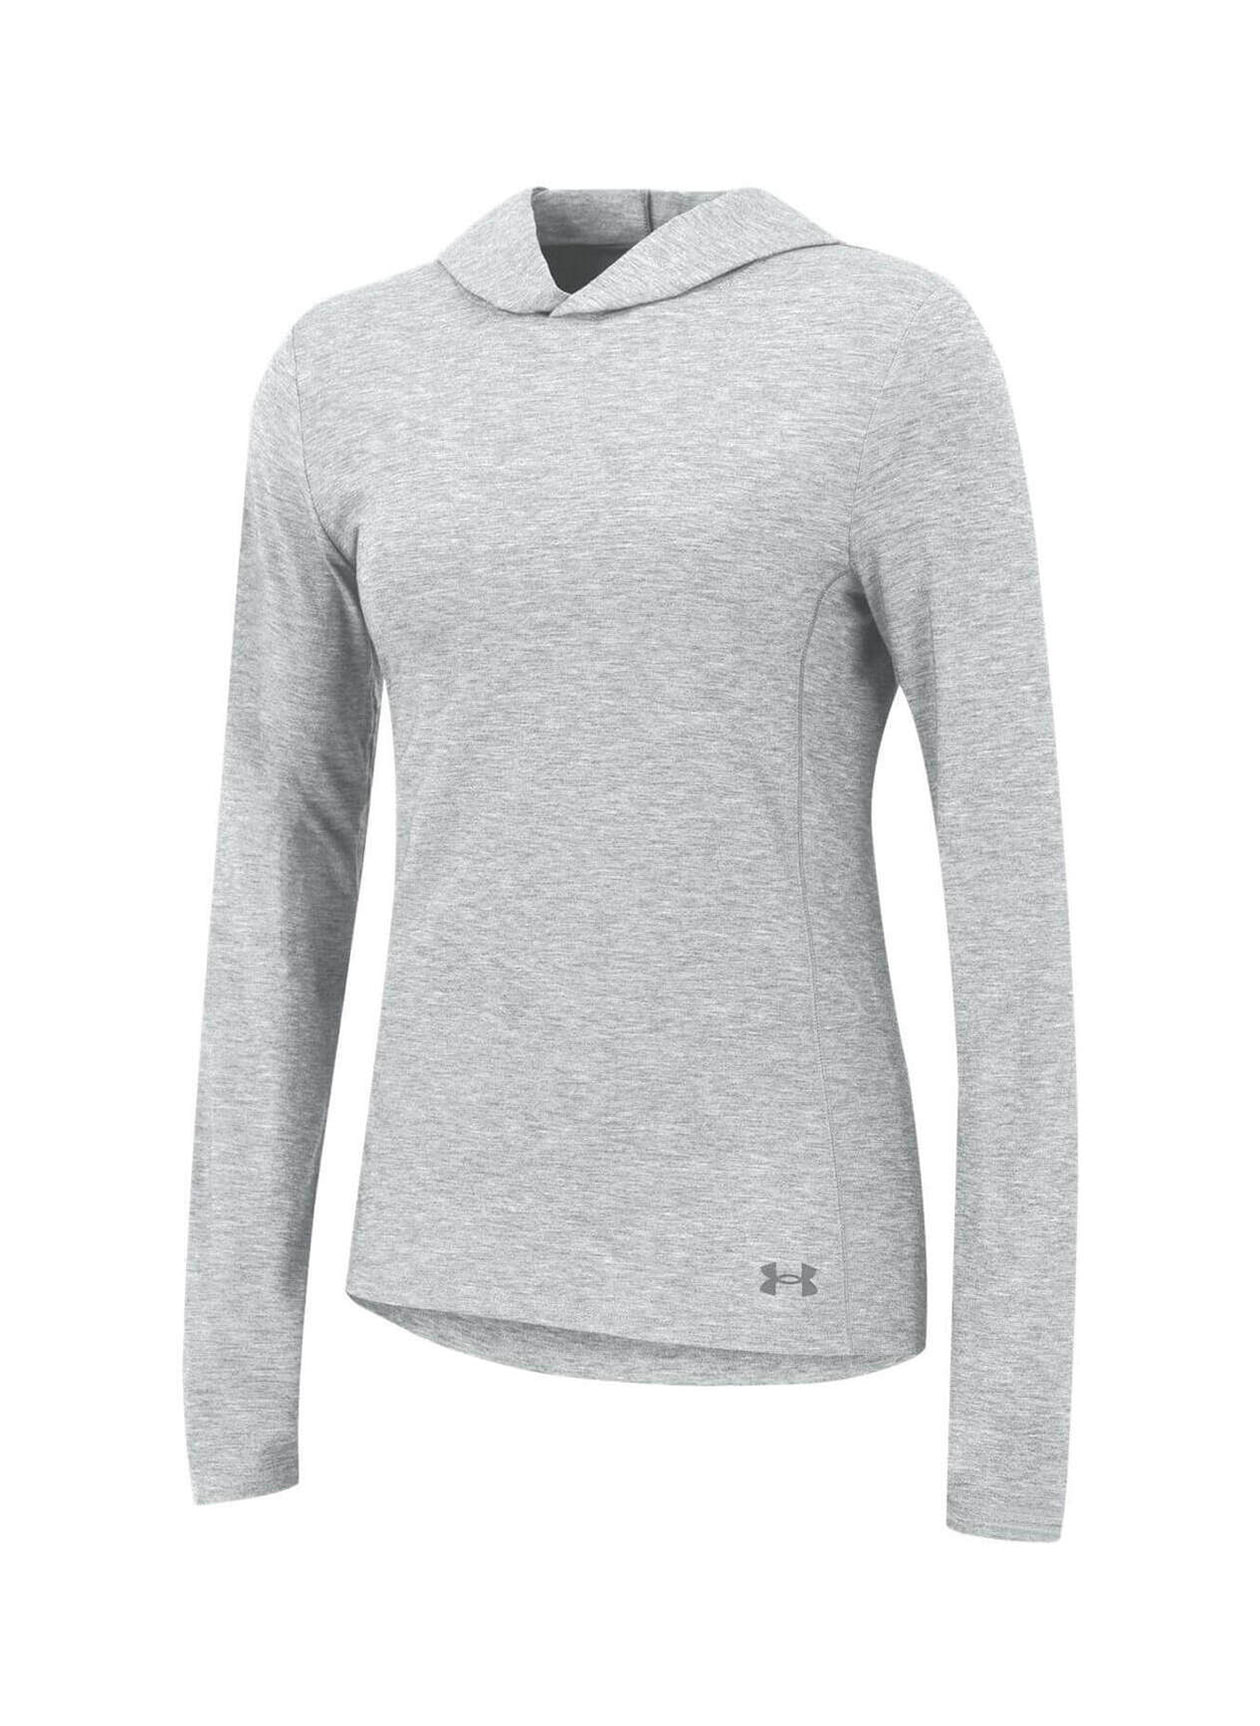 Custom Embroidered Under Armour Women's Aluminum Novelty Breezy Hoodie